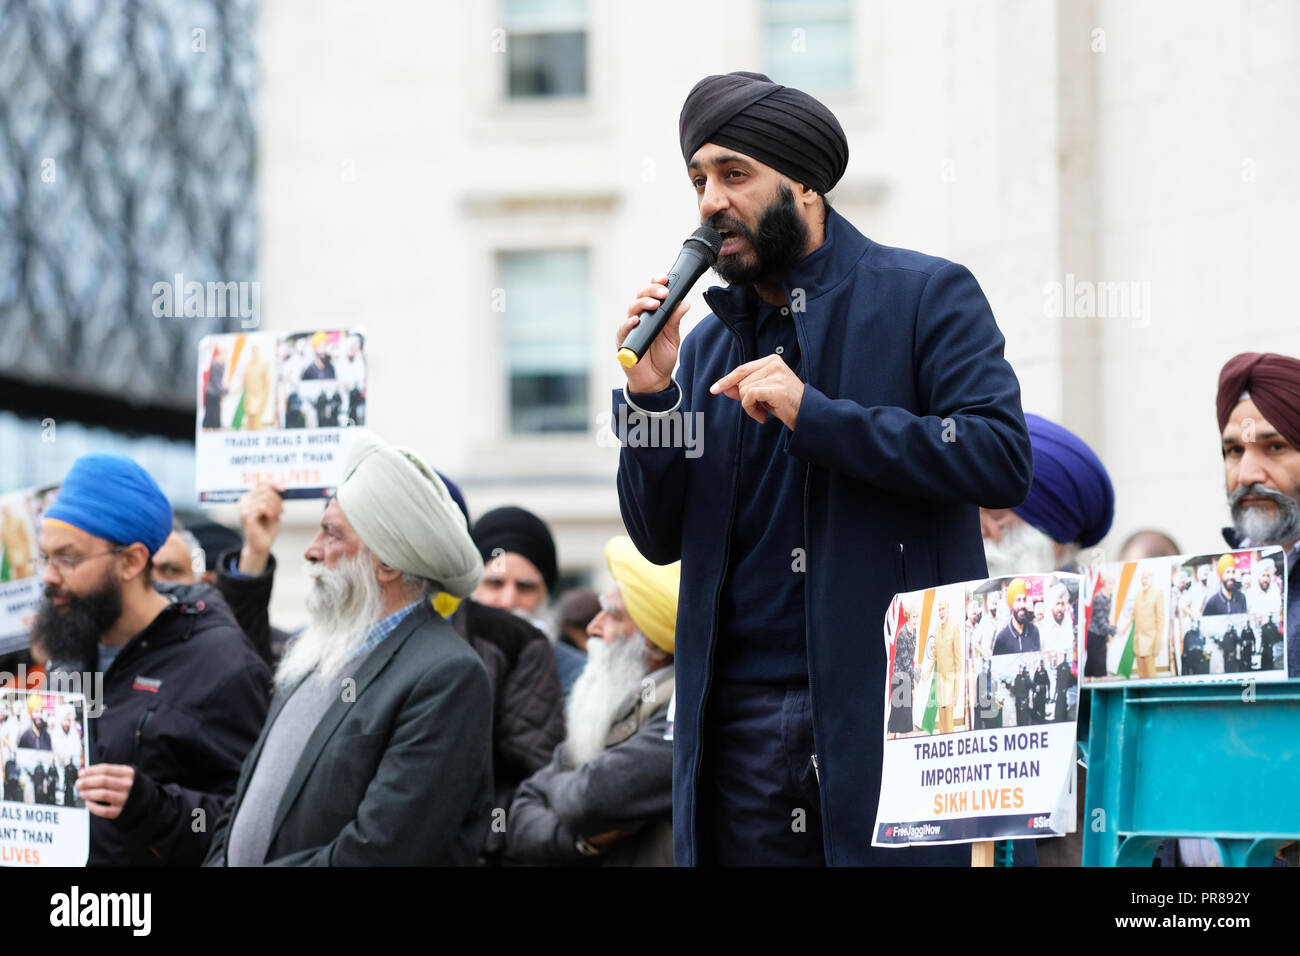 Birmingham, UK - 30 September 2018. Speaker at a protest to demand the release of Jagtar Singh Johal, a 31 year old British Sikh from Scotland detained in India for almost one year - the protest was organised by the Free Jaggi Now group.  Photo Steven May / Alamy Live News Stock Photo